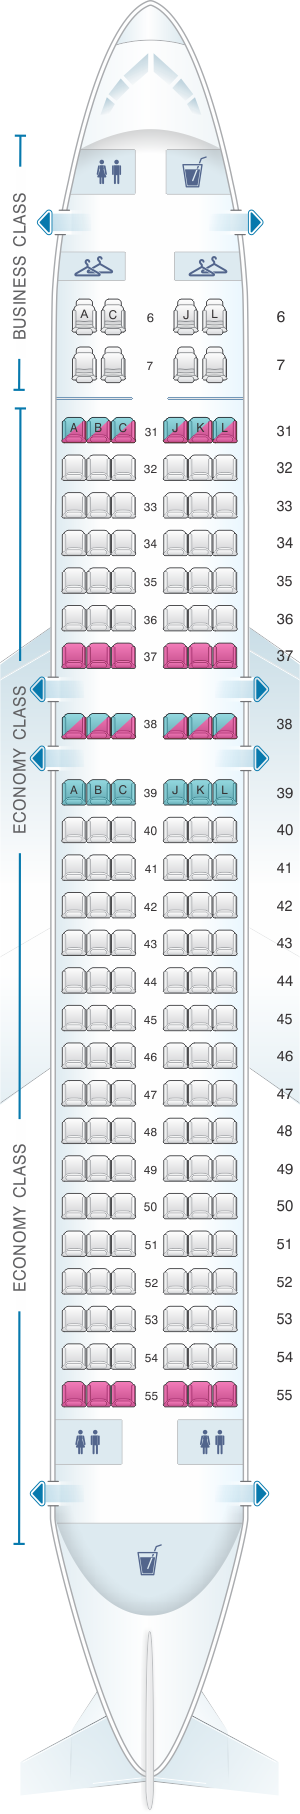 Seat Map China Eastern Airlines Airbus A320 200 | SeatMaestro.com